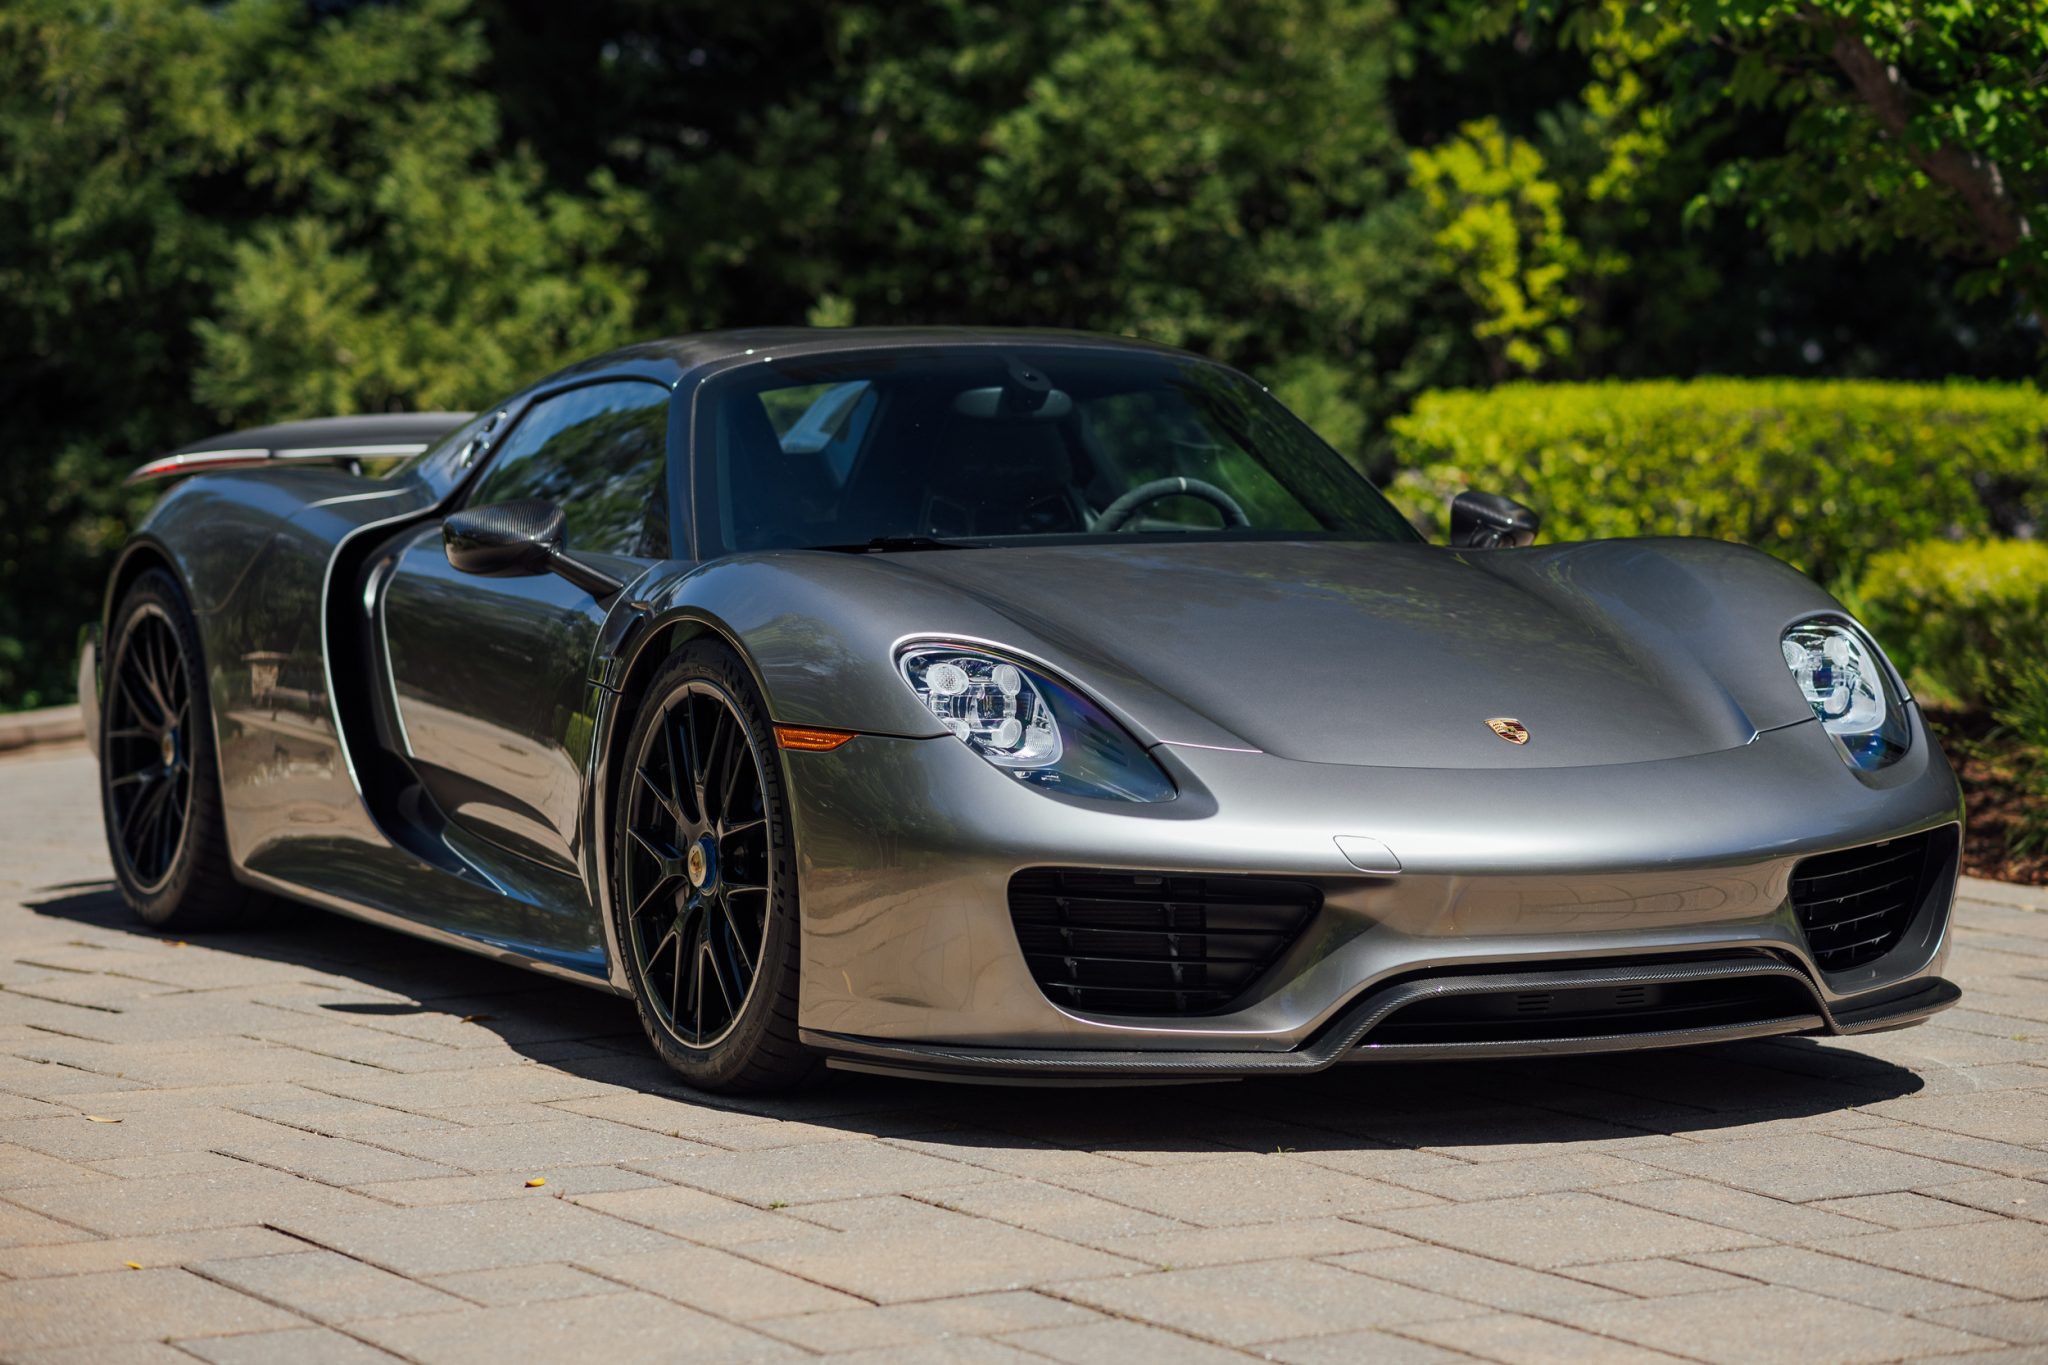 This Rare, Low-Mileage Porsche 918 Spyder Will Sell For A Truckload of Money